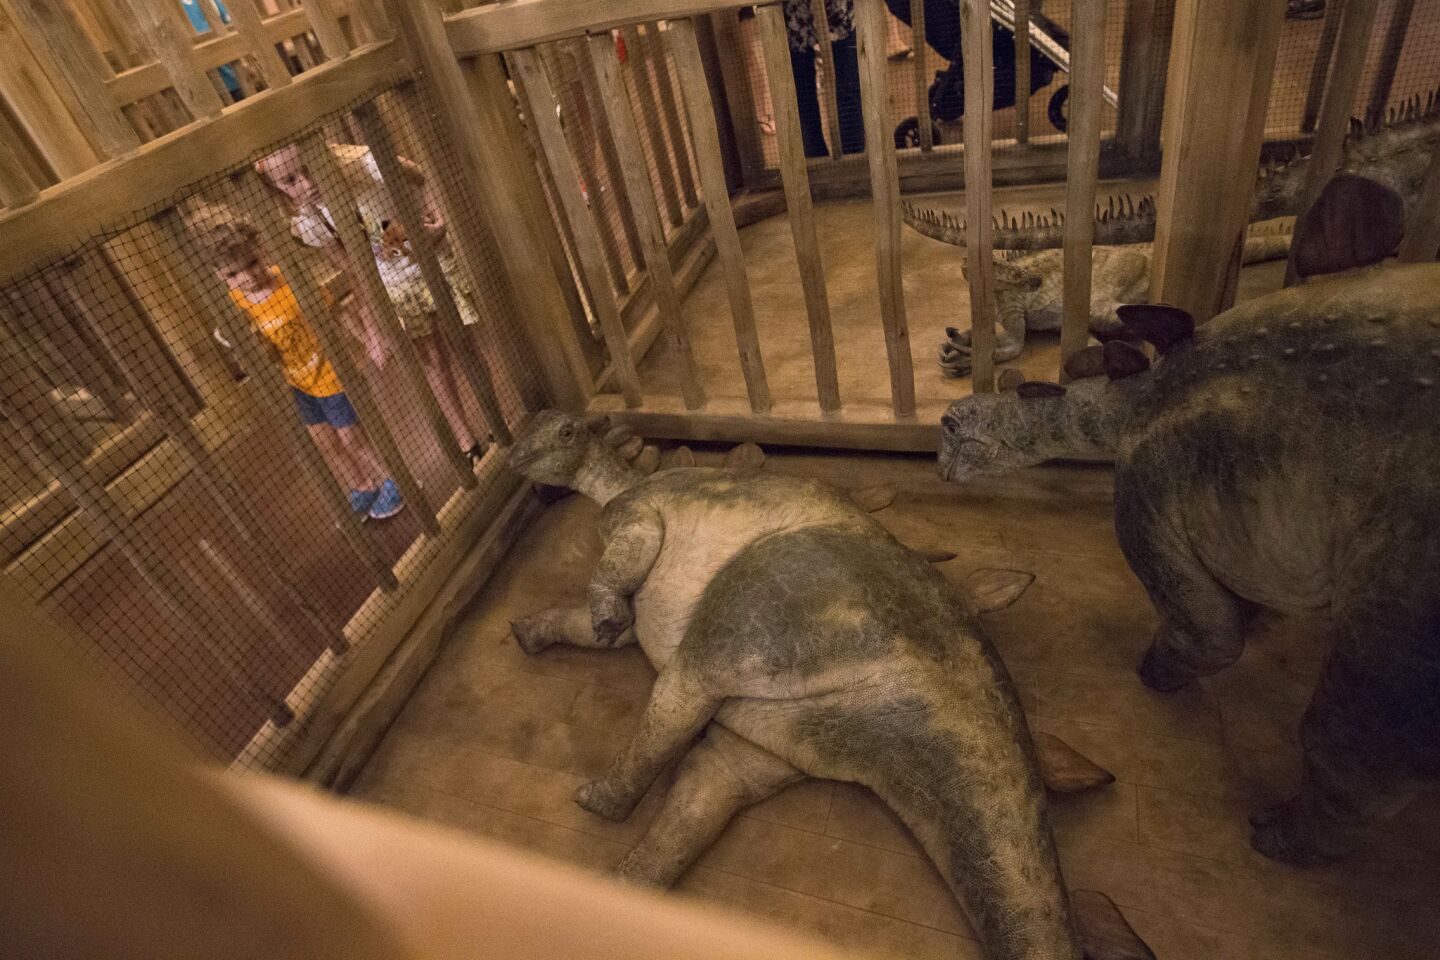 Noah's ark attraction, complete with dinosaurs in cages, ready to open